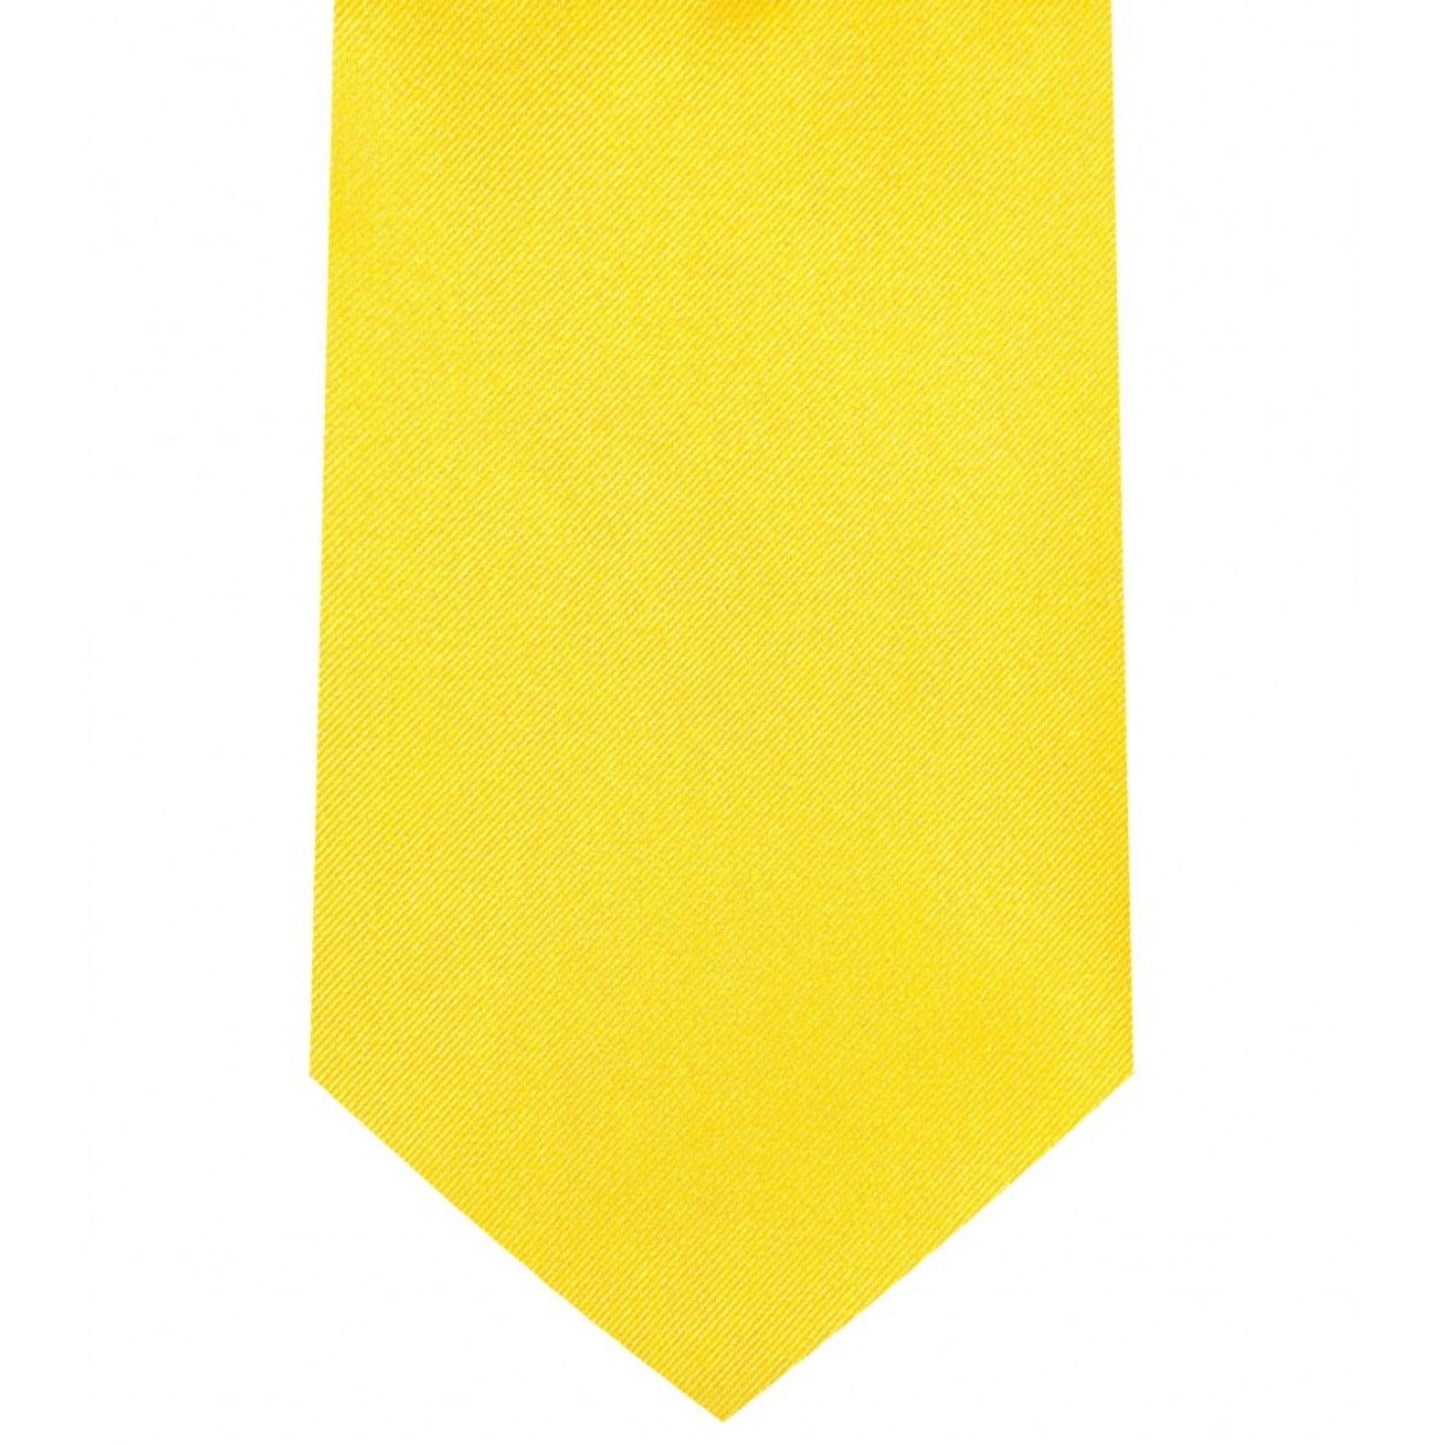 Classic YellowTie Regular width 3.5 inches With Matching Pocket Square | KCT Menswear 